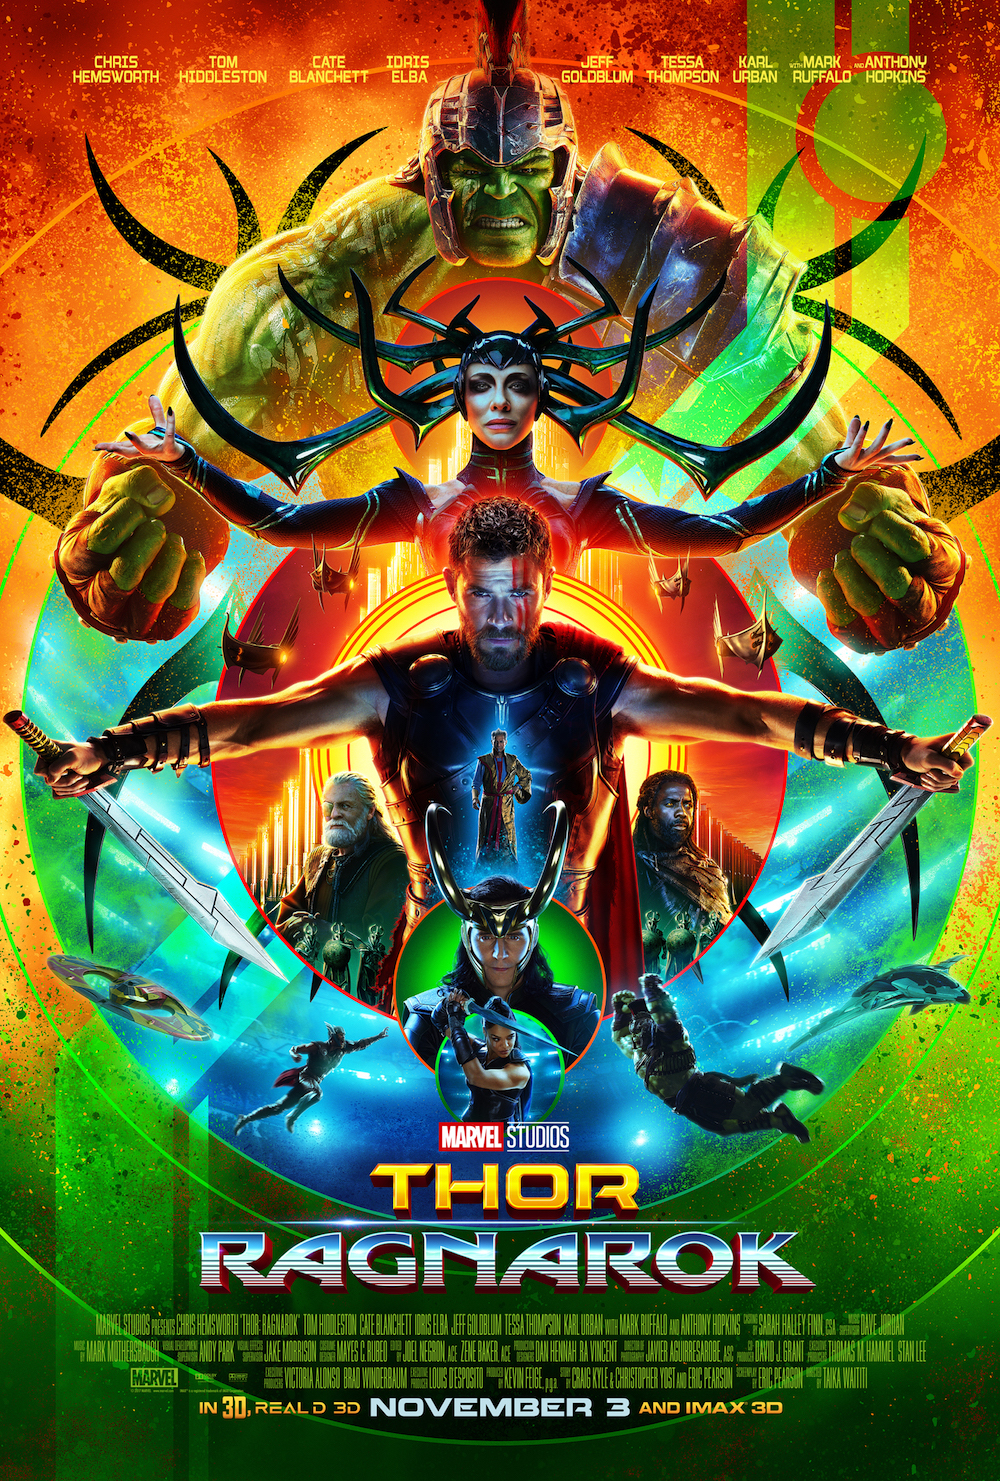 Marvel Reveals New Posters For Black Panther And Thor Ragnarok